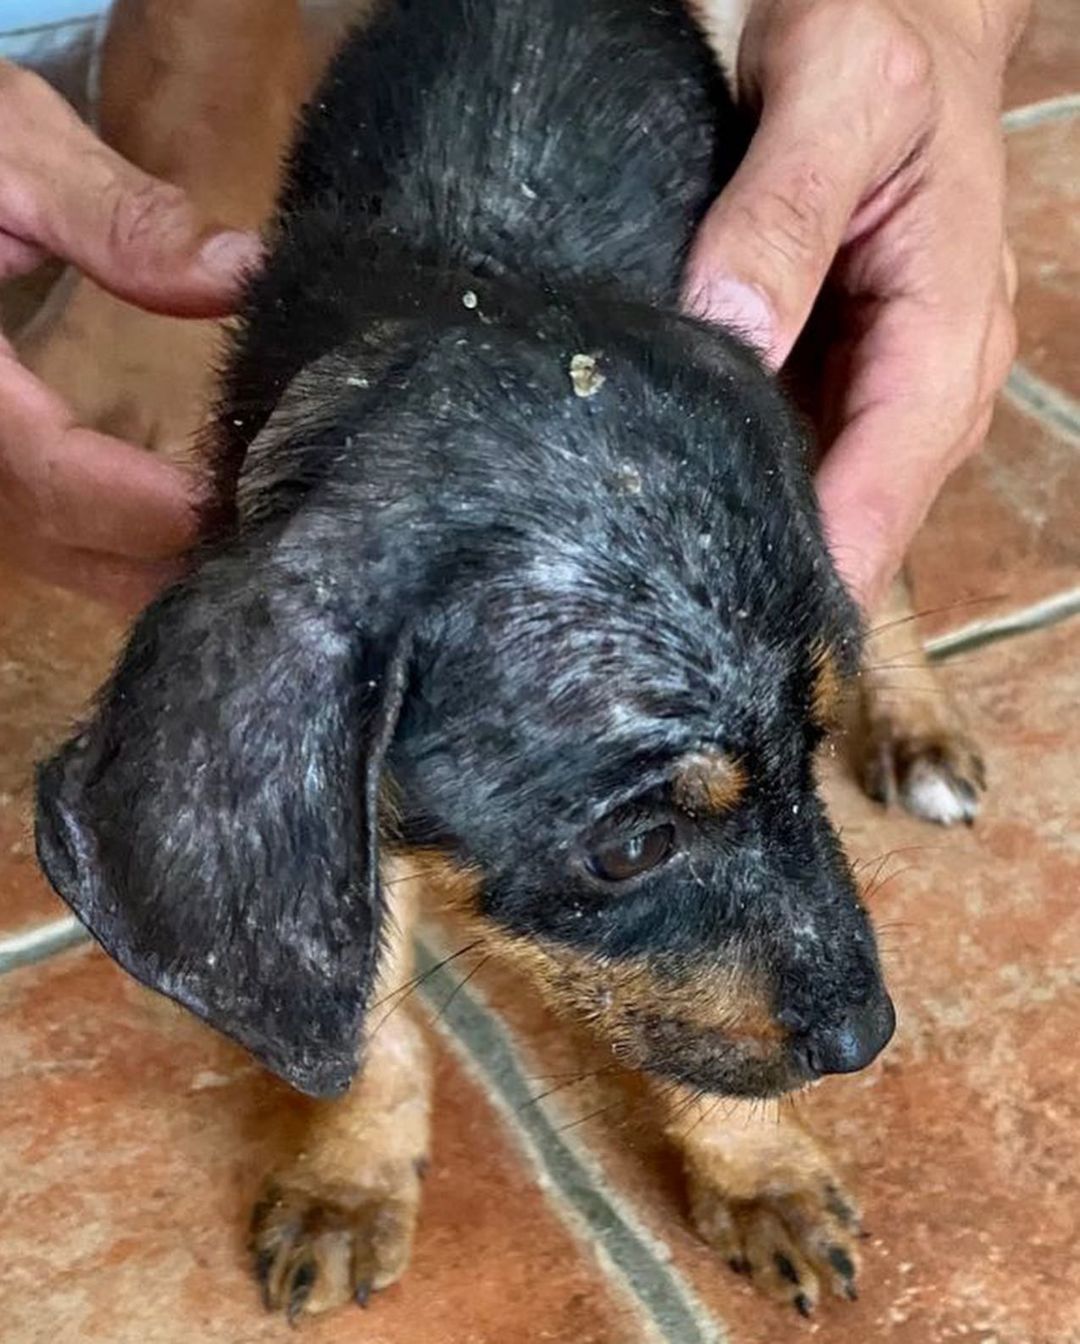 This is our latest rescue. 💔😭 We couldn’t say no. This litter of 5 puppies were dumped in the back of a restaurant (no mother in sight) and we were asked if we could take on the case. The look like dachshund mixes!

They have some serious mange which we are addressing. They have been having medical baths for it. 🛁 

We look forward to their recovery and getting them adopted into loving homes where they will be cherished as a member of the family. 

We would be so grateful for donations and shares to support their ongoing care! Thank you so much as usual!

Venmo: @miraclesforsatosrescue
PayPal: miraclesforsatosrescue@gmail.com
ATH: 787-210-0041

<a target='_blank' href='https://www.instagram.com/explore/tags/miraclesforsatosrescue/'>#miraclesforsatosrescue</a> <a target='_blank' href='https://www.instagram.com/explore/tags/dogrescue/'>#dogrescue</a> <a target='_blank' href='https://www.instagram.com/explore/tags/rescuedogsofinstagram/'>#rescuedogsofinstagram</a> <a target='_blank' href='https://www.instagram.com/explore/tags/puppyrescue/'>#puppyrescue</a> <a target='_blank' href='https://www.instagram.com/explore/tags/puppy/'>#puppy</a> <a target='_blank' href='https://www.instagram.com/explore/tags/abandonedpuppies/'>#abandonedpuppies</a> <a target='_blank' href='https://www.instagram.com/explore/tags/dogsofpuertorico/'>#dogsofpuertorico</a> <a target='_blank' href='https://www.instagram.com/explore/tags/puertorico/'>#puertorico</a> <a target='_blank' href='https://www.instagram.com/explore/tags/fundraiser/'>#fundraiser</a> <a target='_blank' href='https://www.instagram.com/explore/tags/donate/'>#donate</a> <a target='_blank' href='https://www.instagram.com/explore/tags/donateplease/'>#donateplease</a> <a target='_blank' href='https://www.instagram.com/explore/tags/pleasedonate/'>#pleasedonate</a> <a target='_blank' href='https://www.instagram.com/explore/tags/dachshundsofinstagram/'>#dachshundsofinstagram</a> <a target='_blank' href='https://www.instagram.com/explore/tags/chihuahuasofinstagram/'>#chihuahuasofinstagram</a>